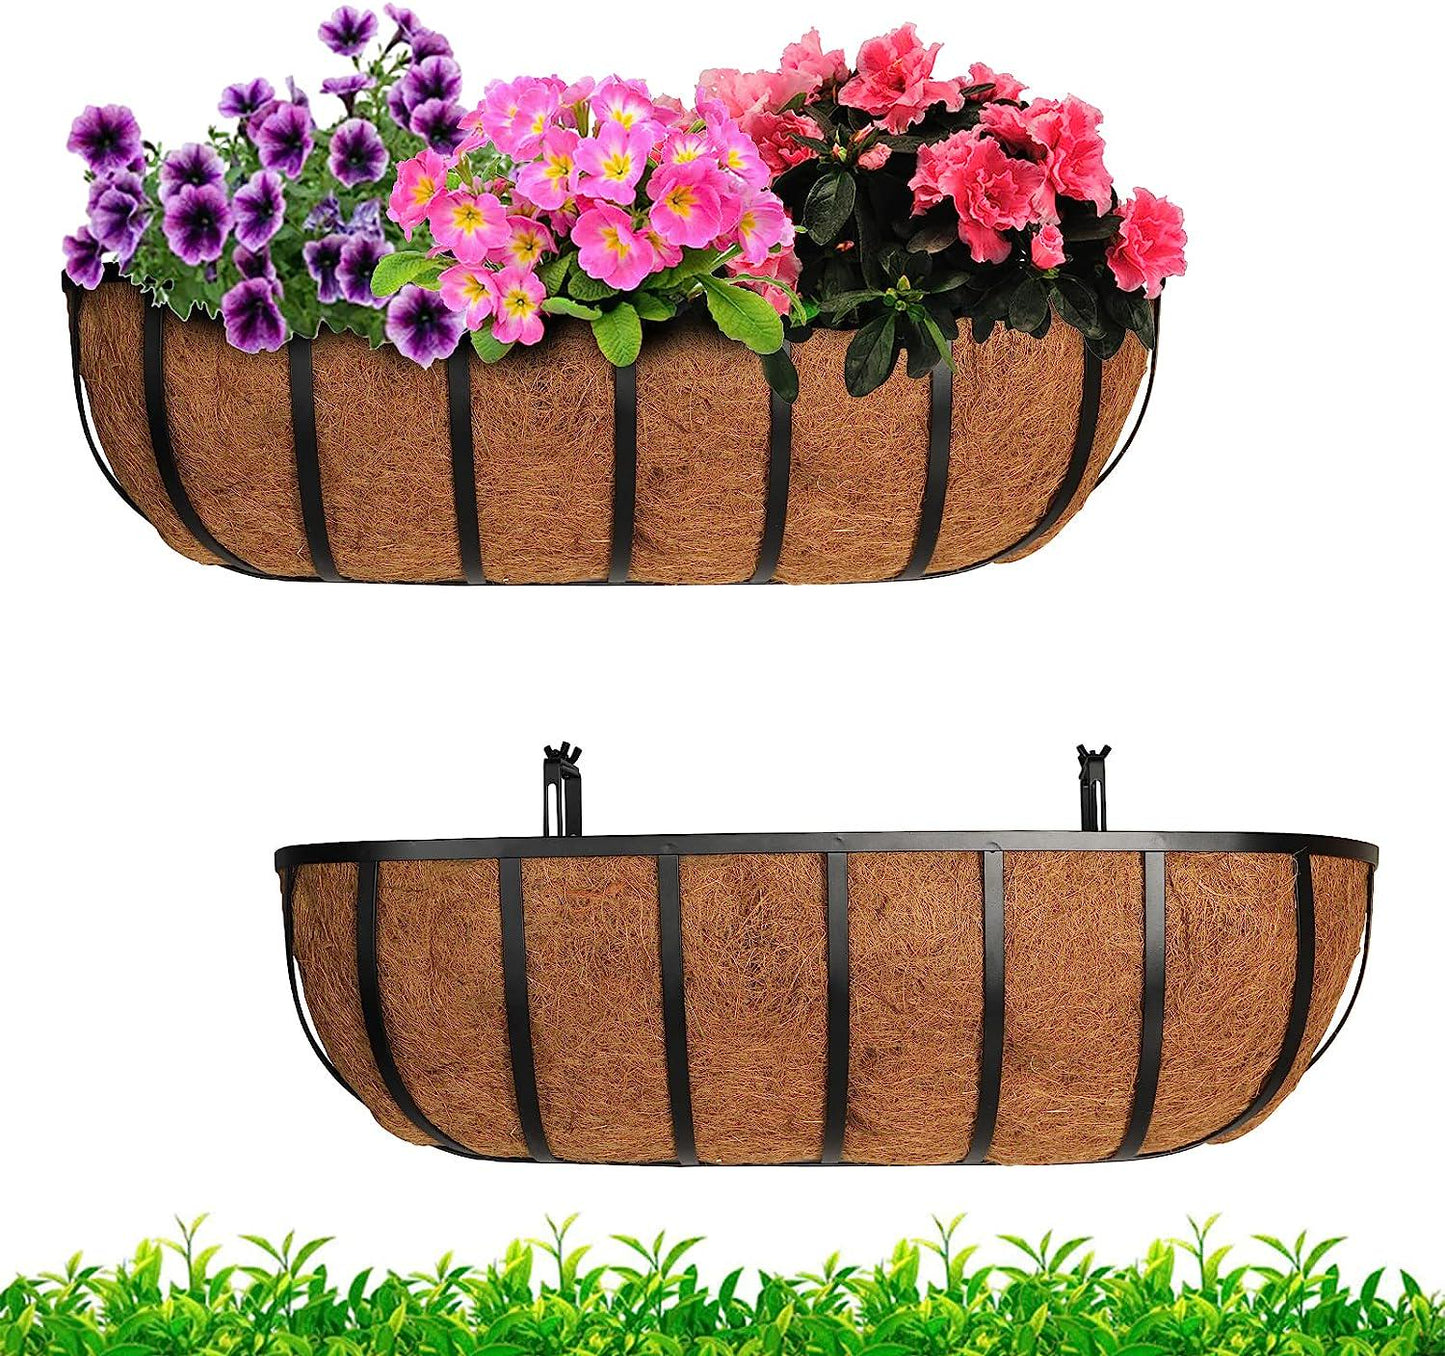 24 Inch Window Box Deck Railing Planter with Coco Liner Metal Horse Troughs Fence Planter Balcony Metal Hanging Planter Bracket Deck Railing Planter Boxes